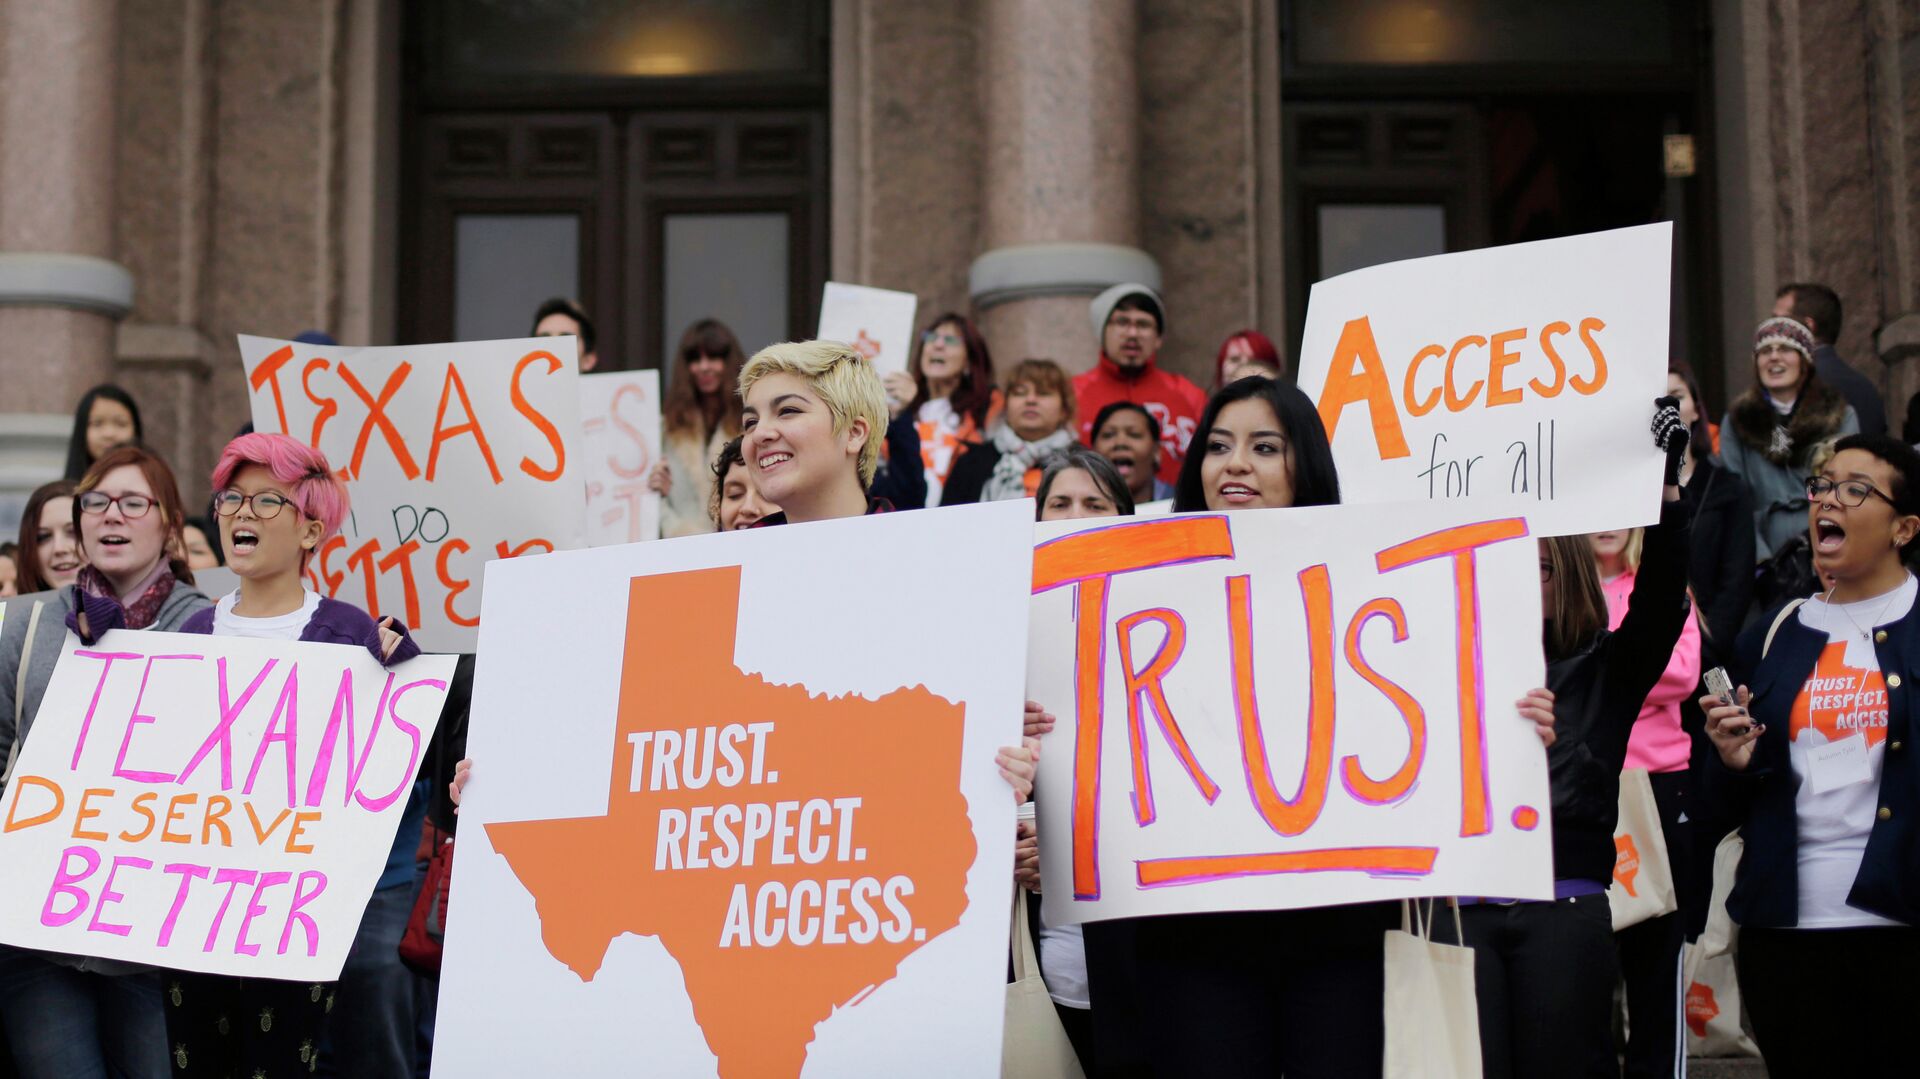 FILE - In this Feb. 26, 2015 file photo, college students and abortion rights activists hold signs during a rally on the steps of the Texas Capitol, in Austin, Texas. The Supreme Court refused on Monday, June 29, 2015, to allow Texas to enforce restrictions that would force 10 abortion clinics to close - Sputnik International, 1920, 09.09.2021